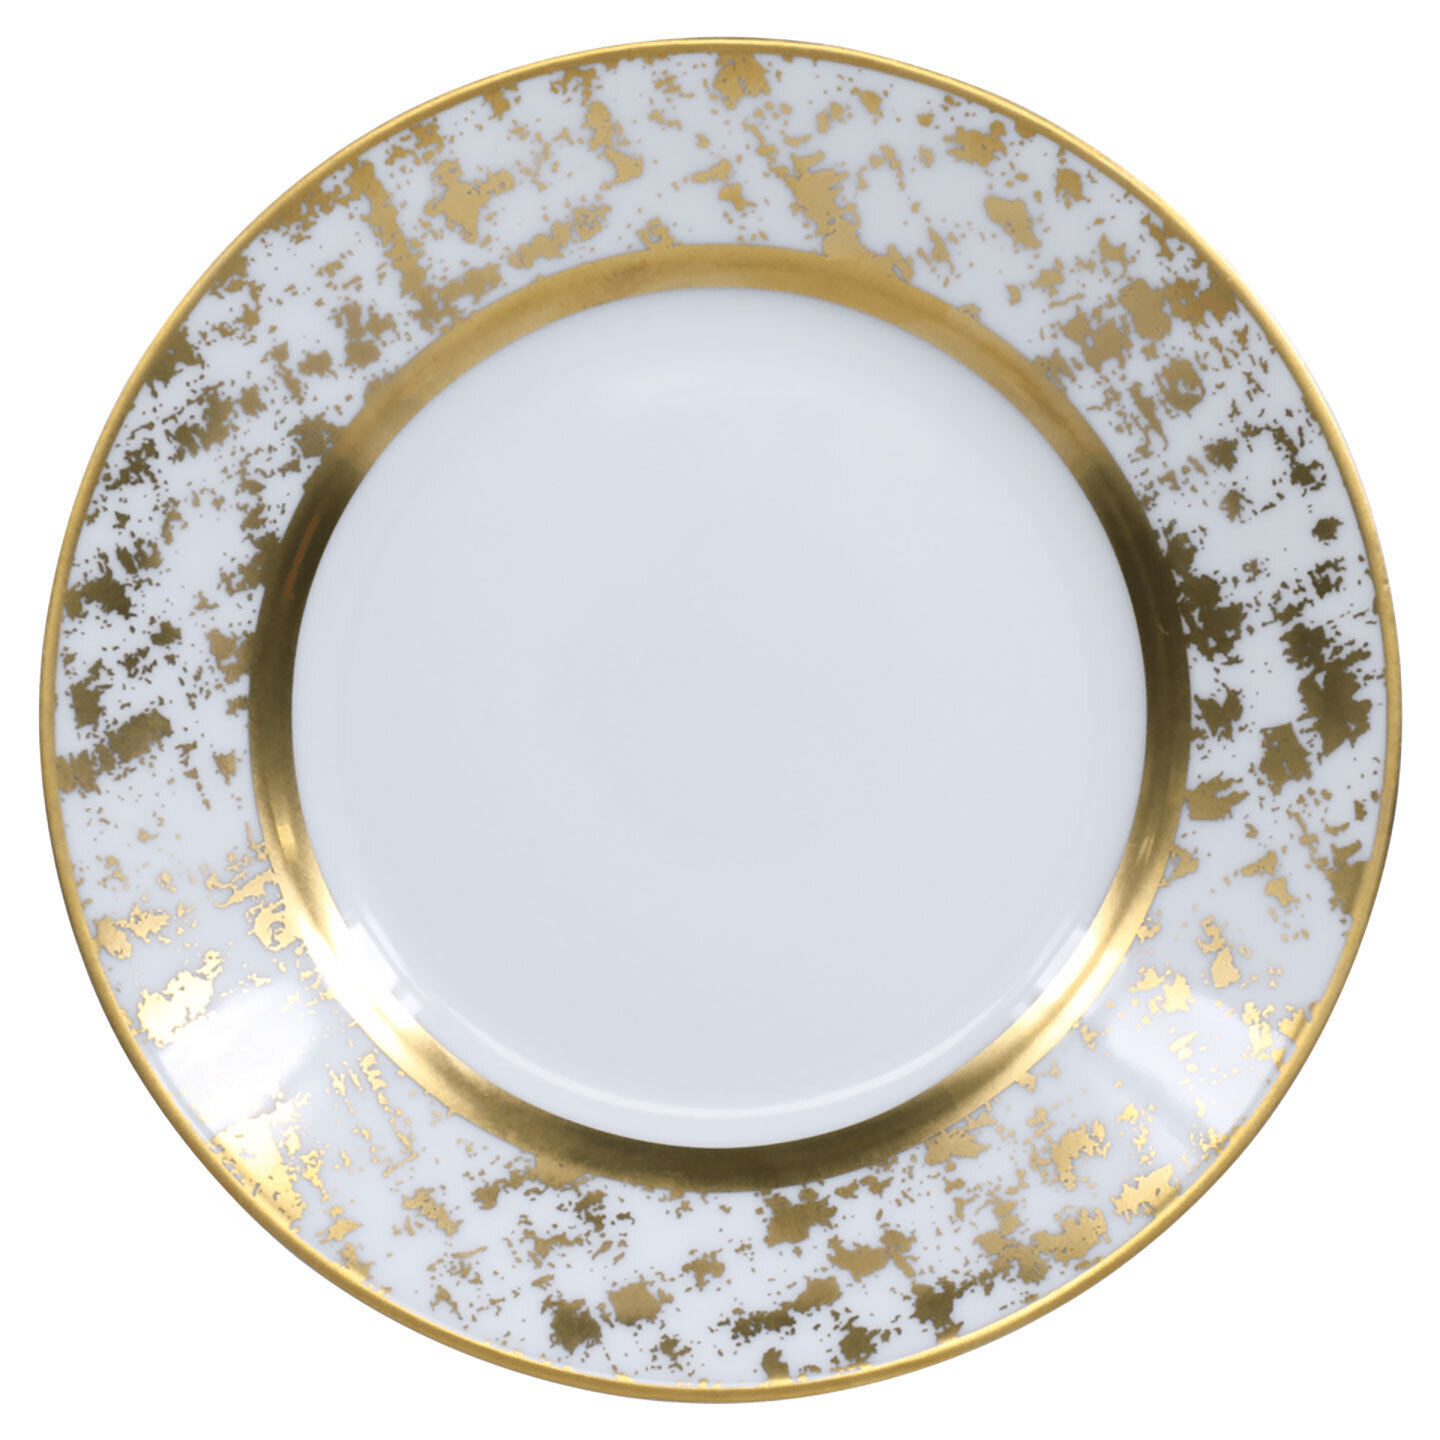 Royal Limoges Tweed White & Gold Bread & Butter Plate B160-REC20848